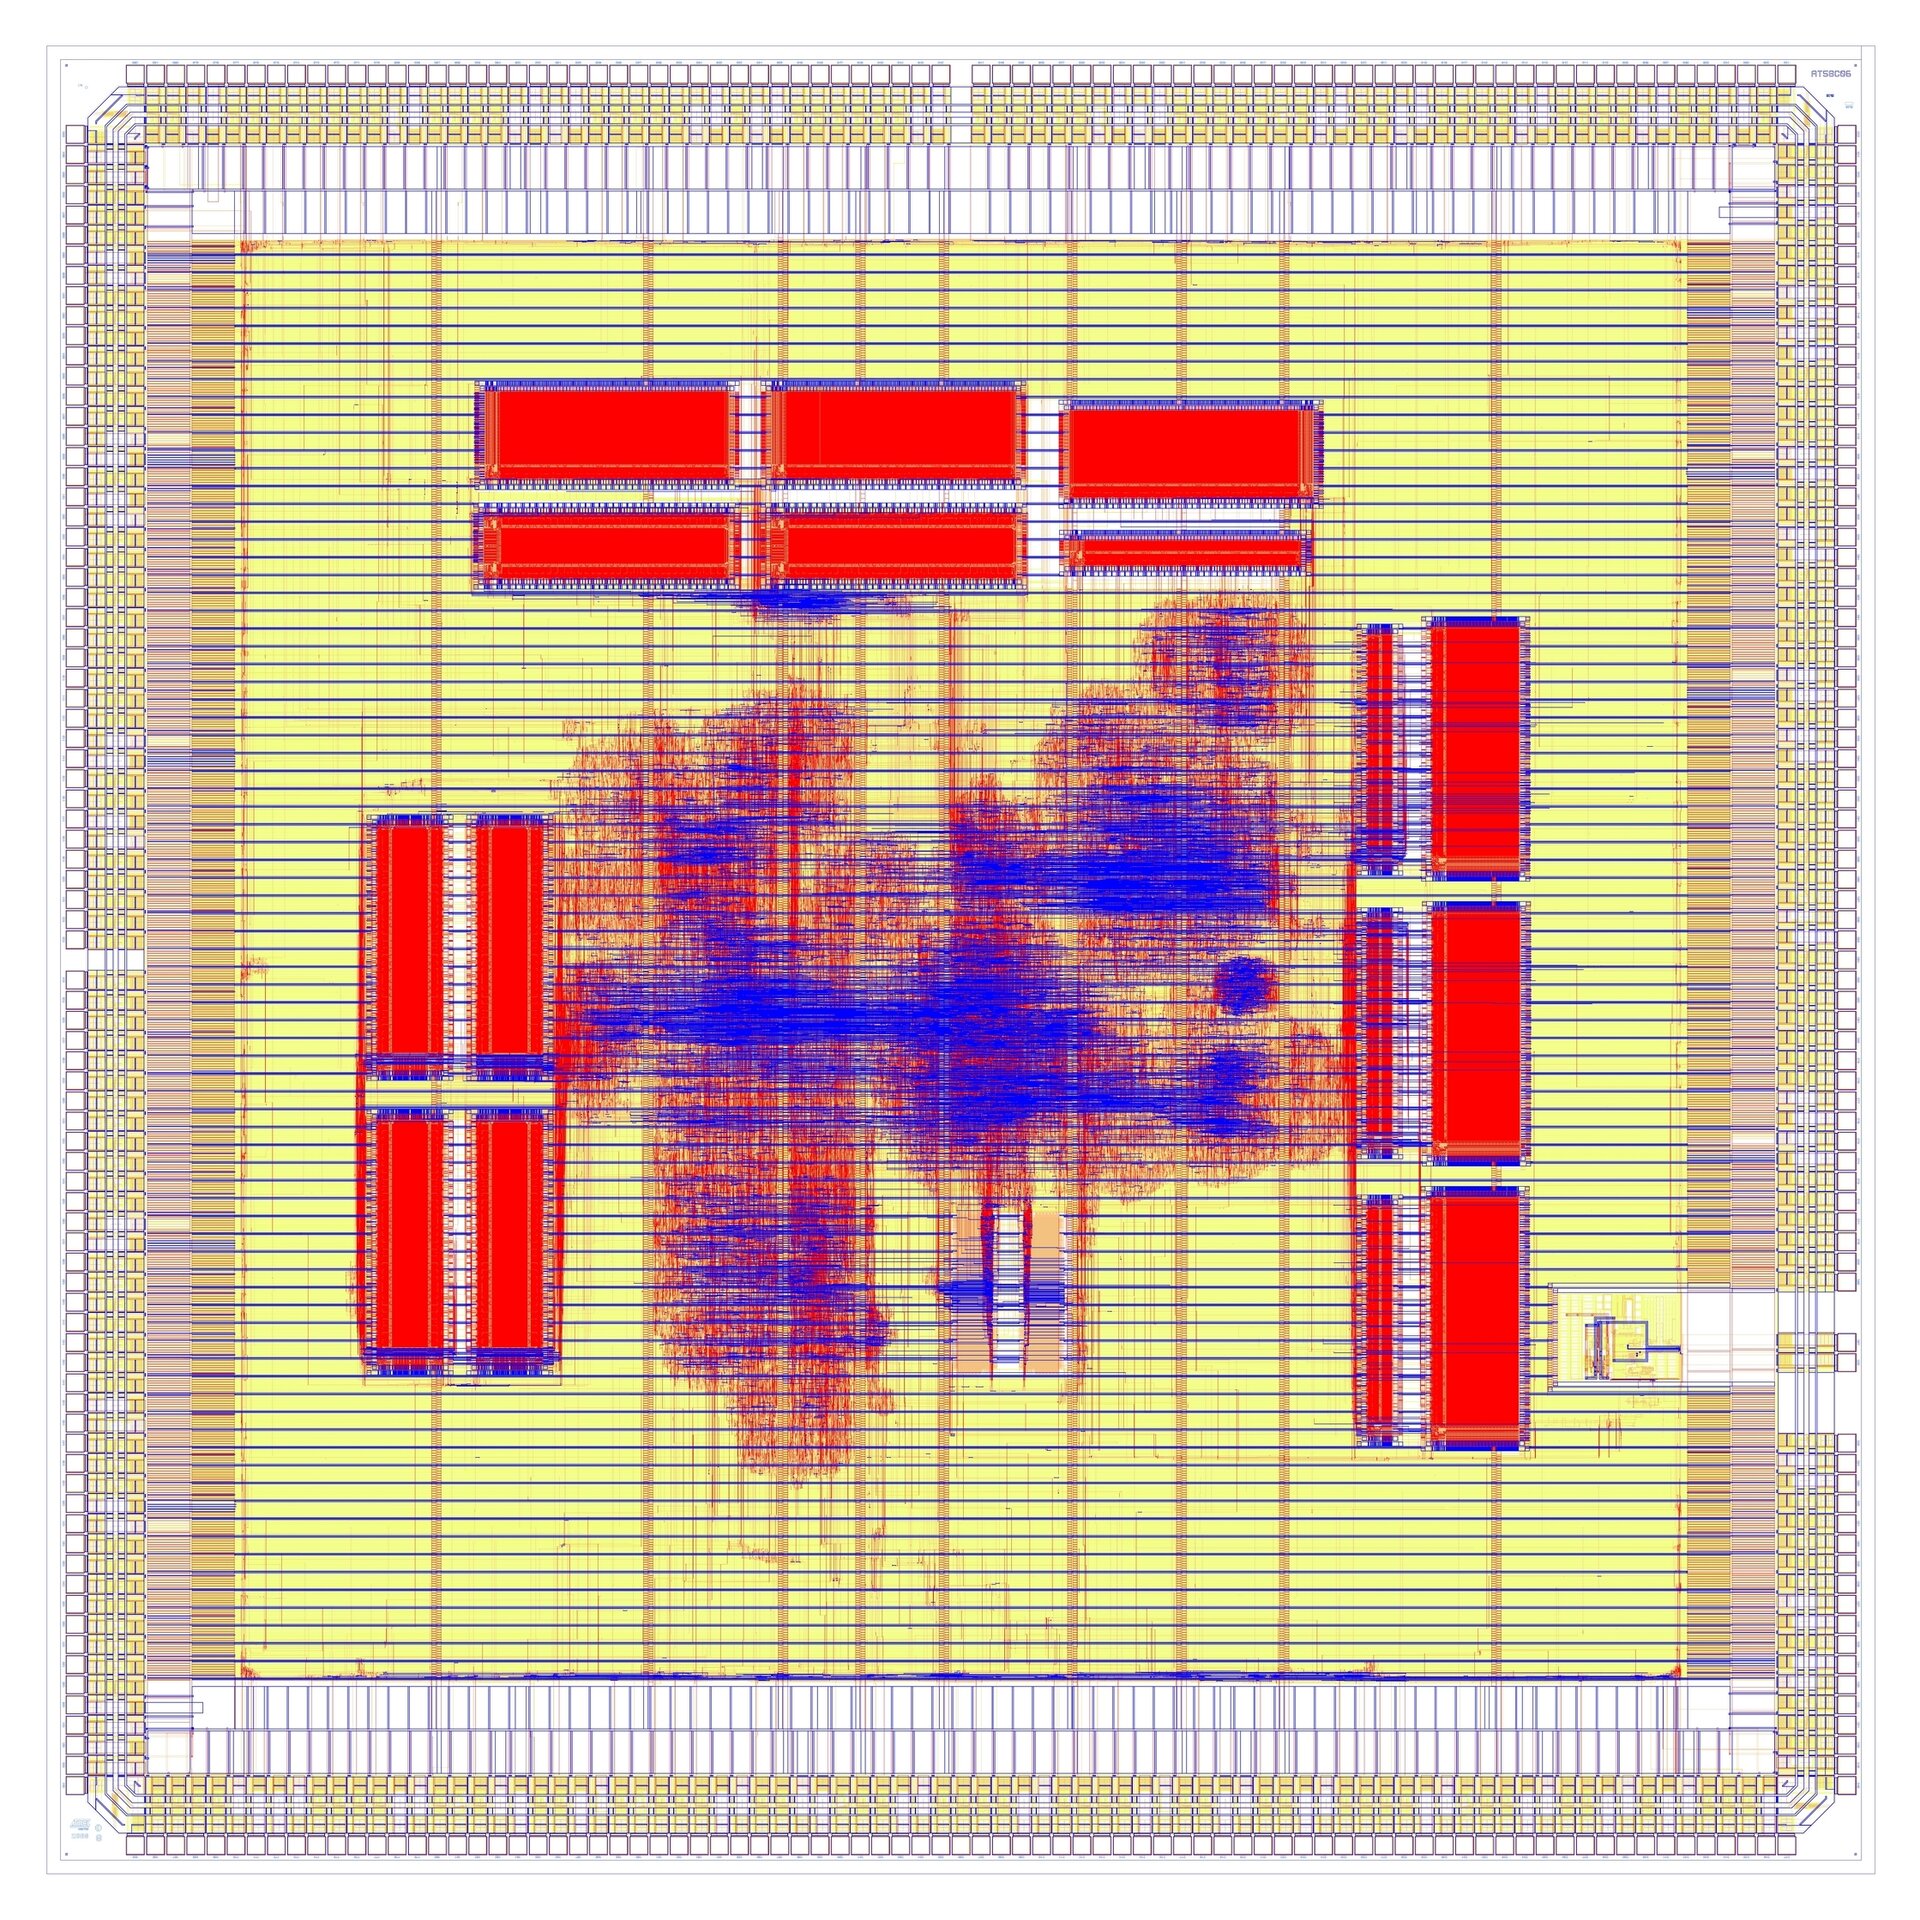 Layout of the LEON2-FT chip, alias AT697 